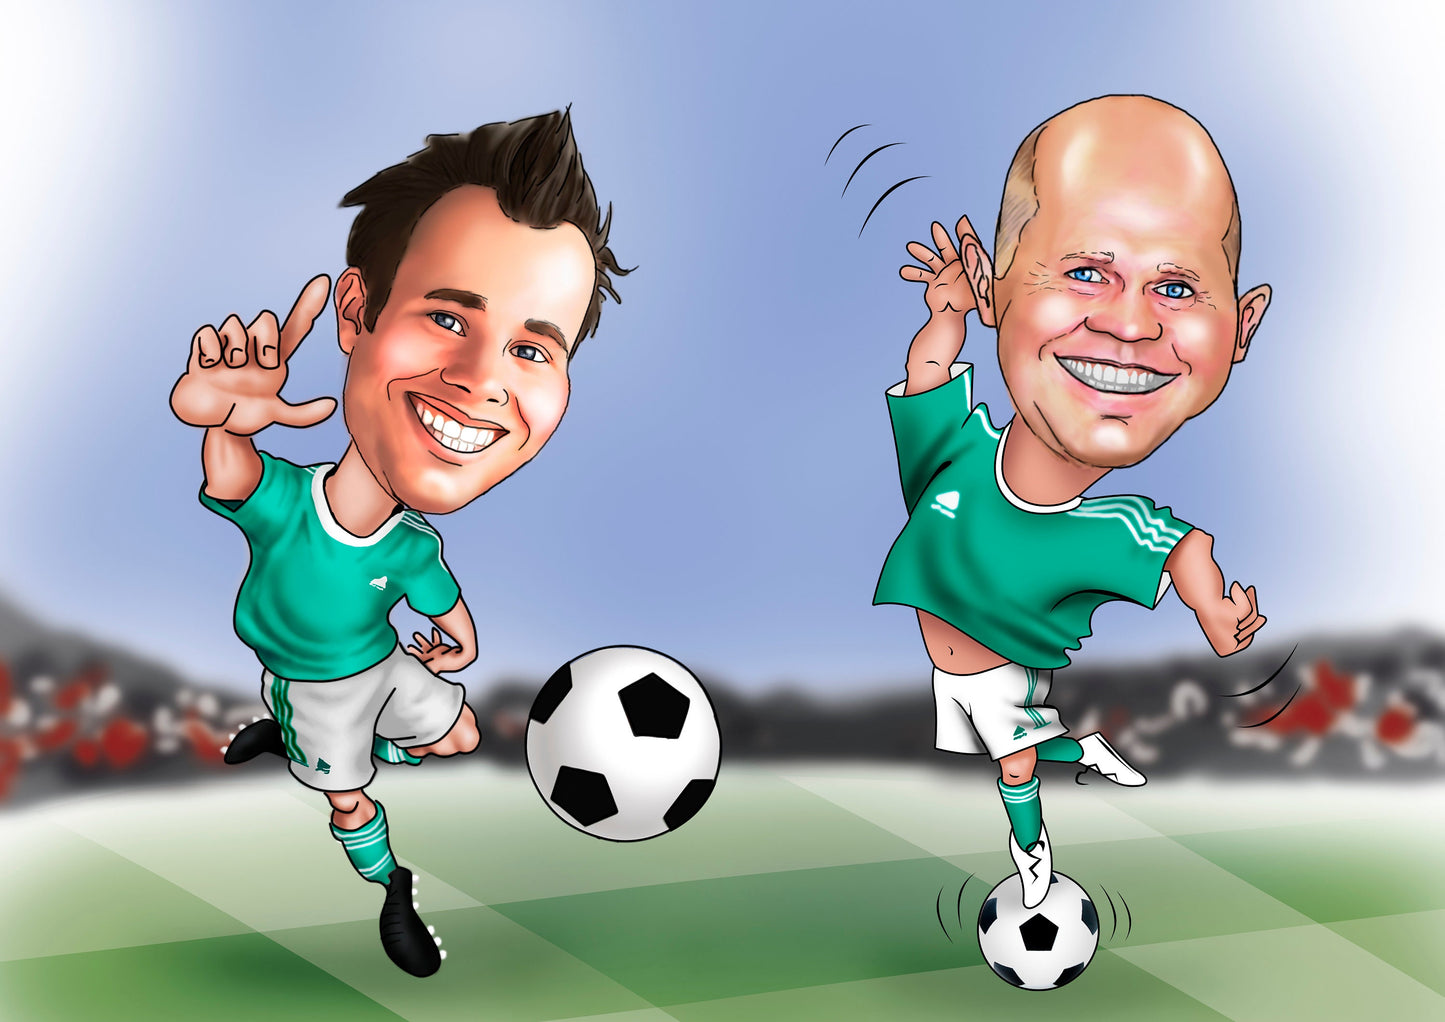 Soccer Player Gift - custom caricature portrait from your photo/soccer coach gifts/soccer gifts/football player gift